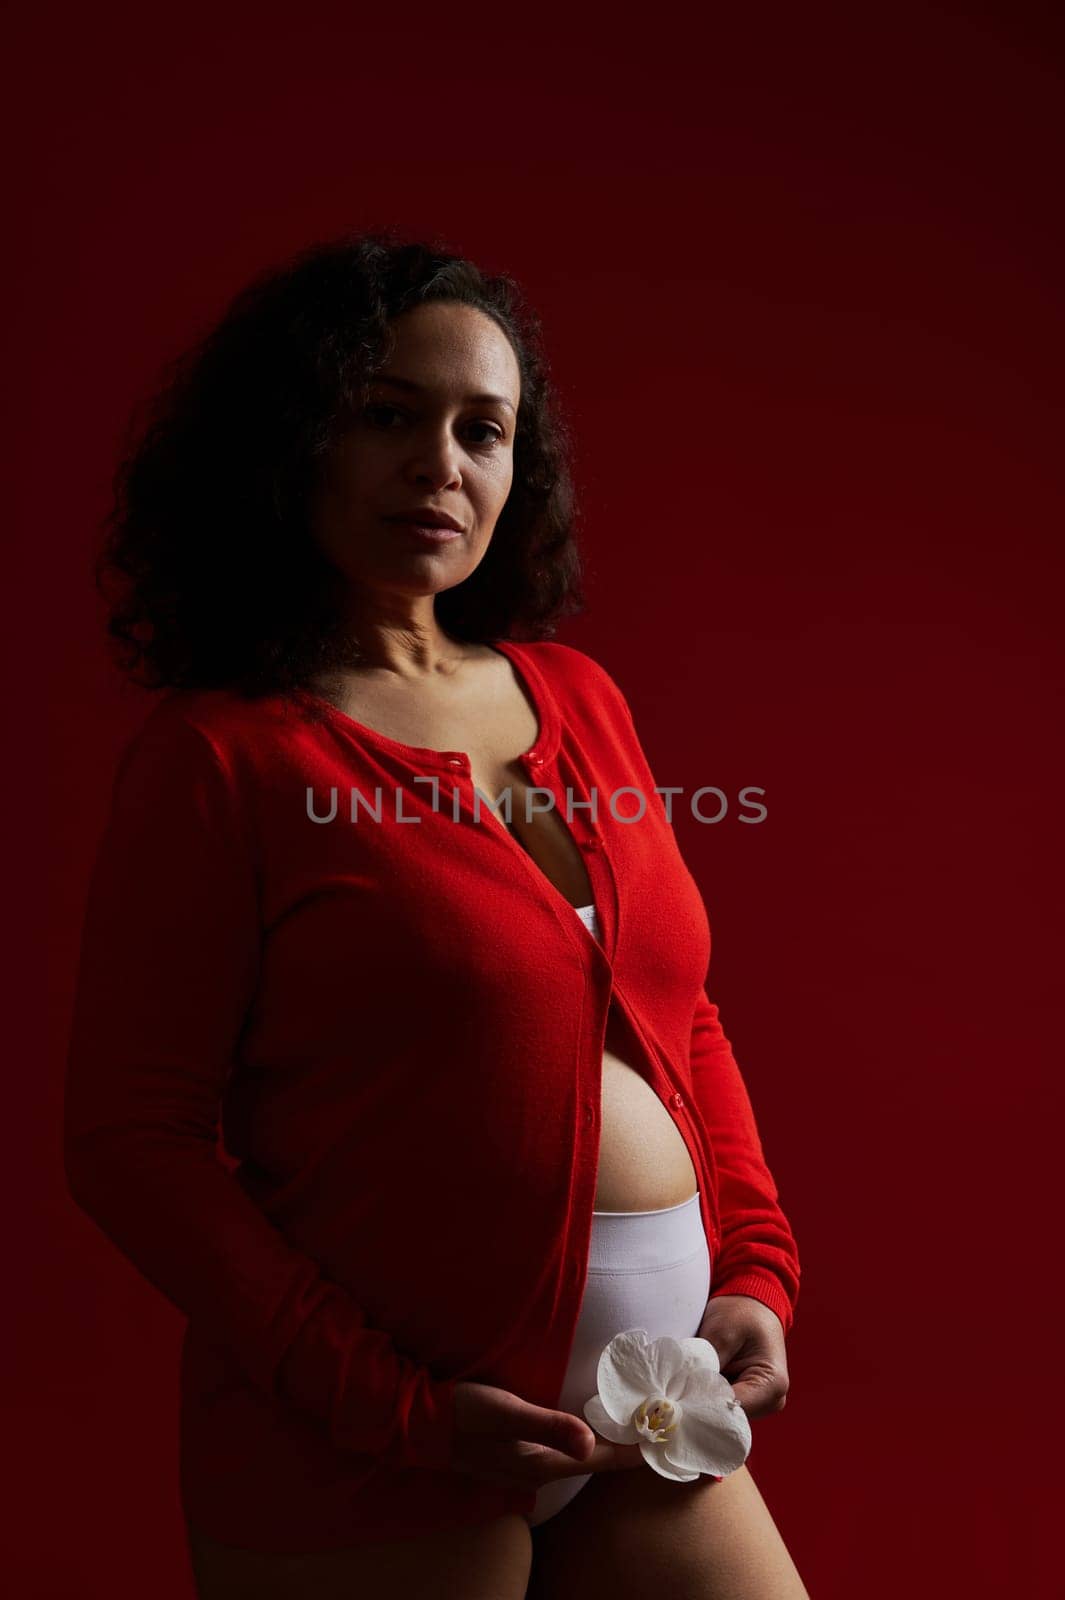 Authentic ethnic pregnant woman, expectant mother wearing red unbuttoned shirt, holding orchid flower, looking at camera by artgf